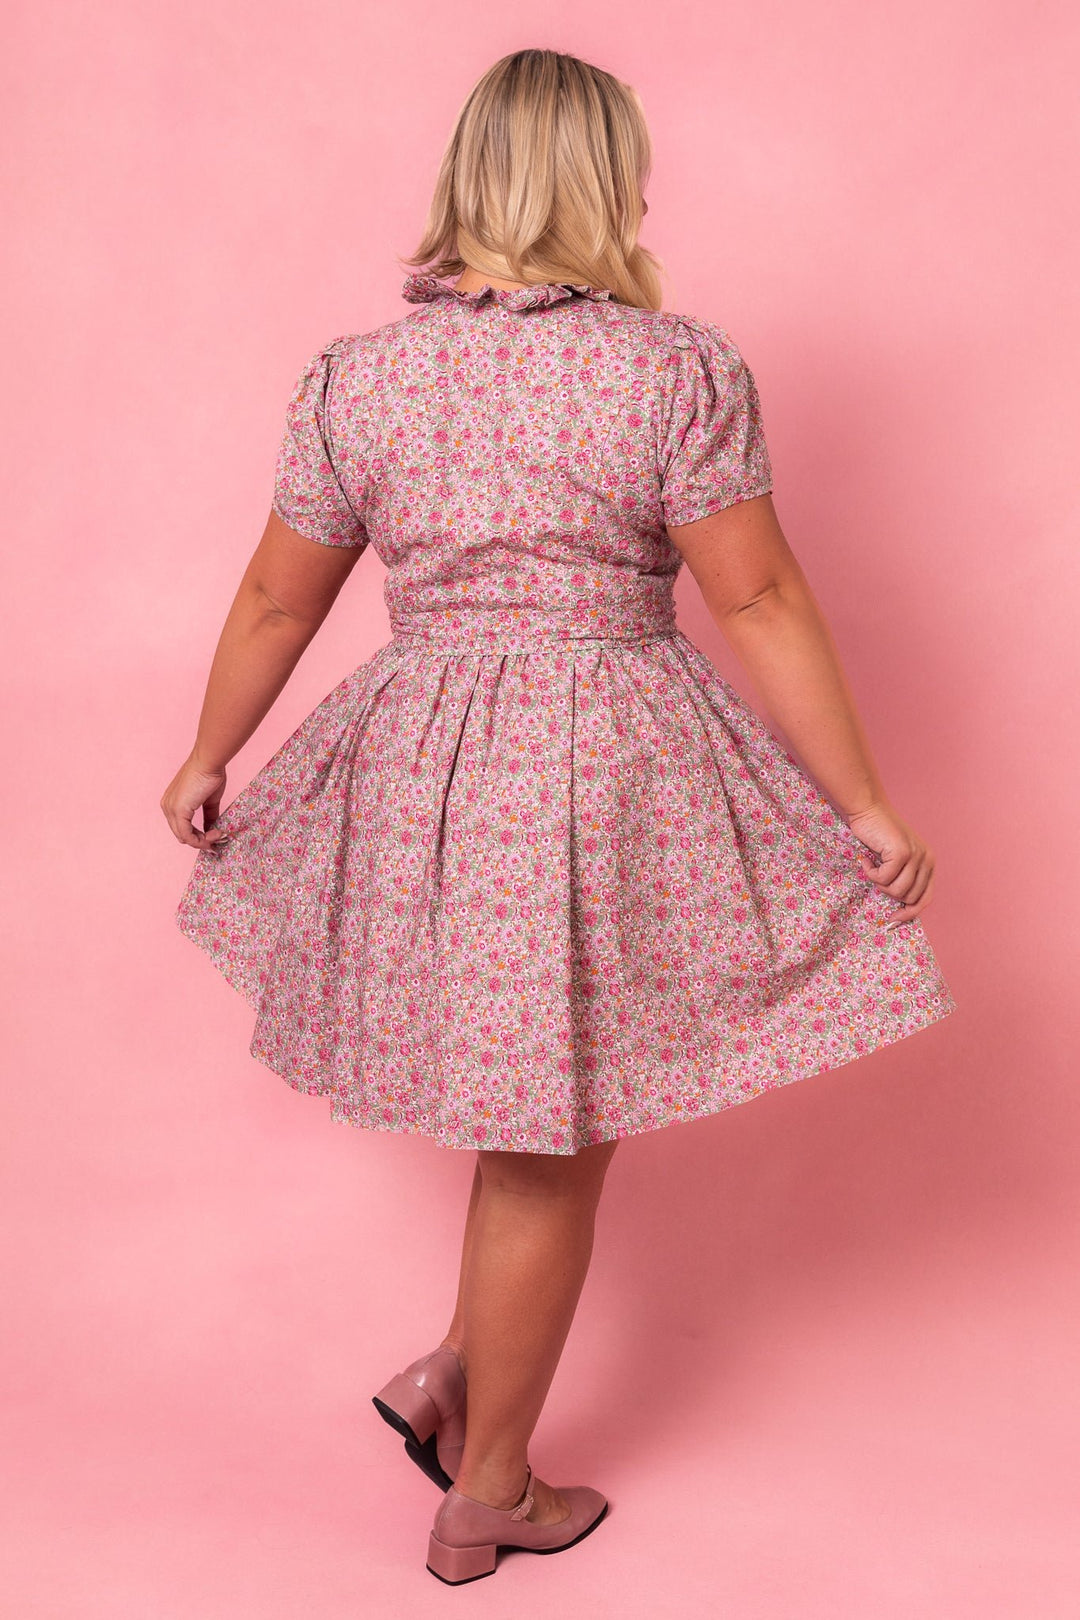 Chelsea Dress Made With Liberty Fabric - FINAL SALE